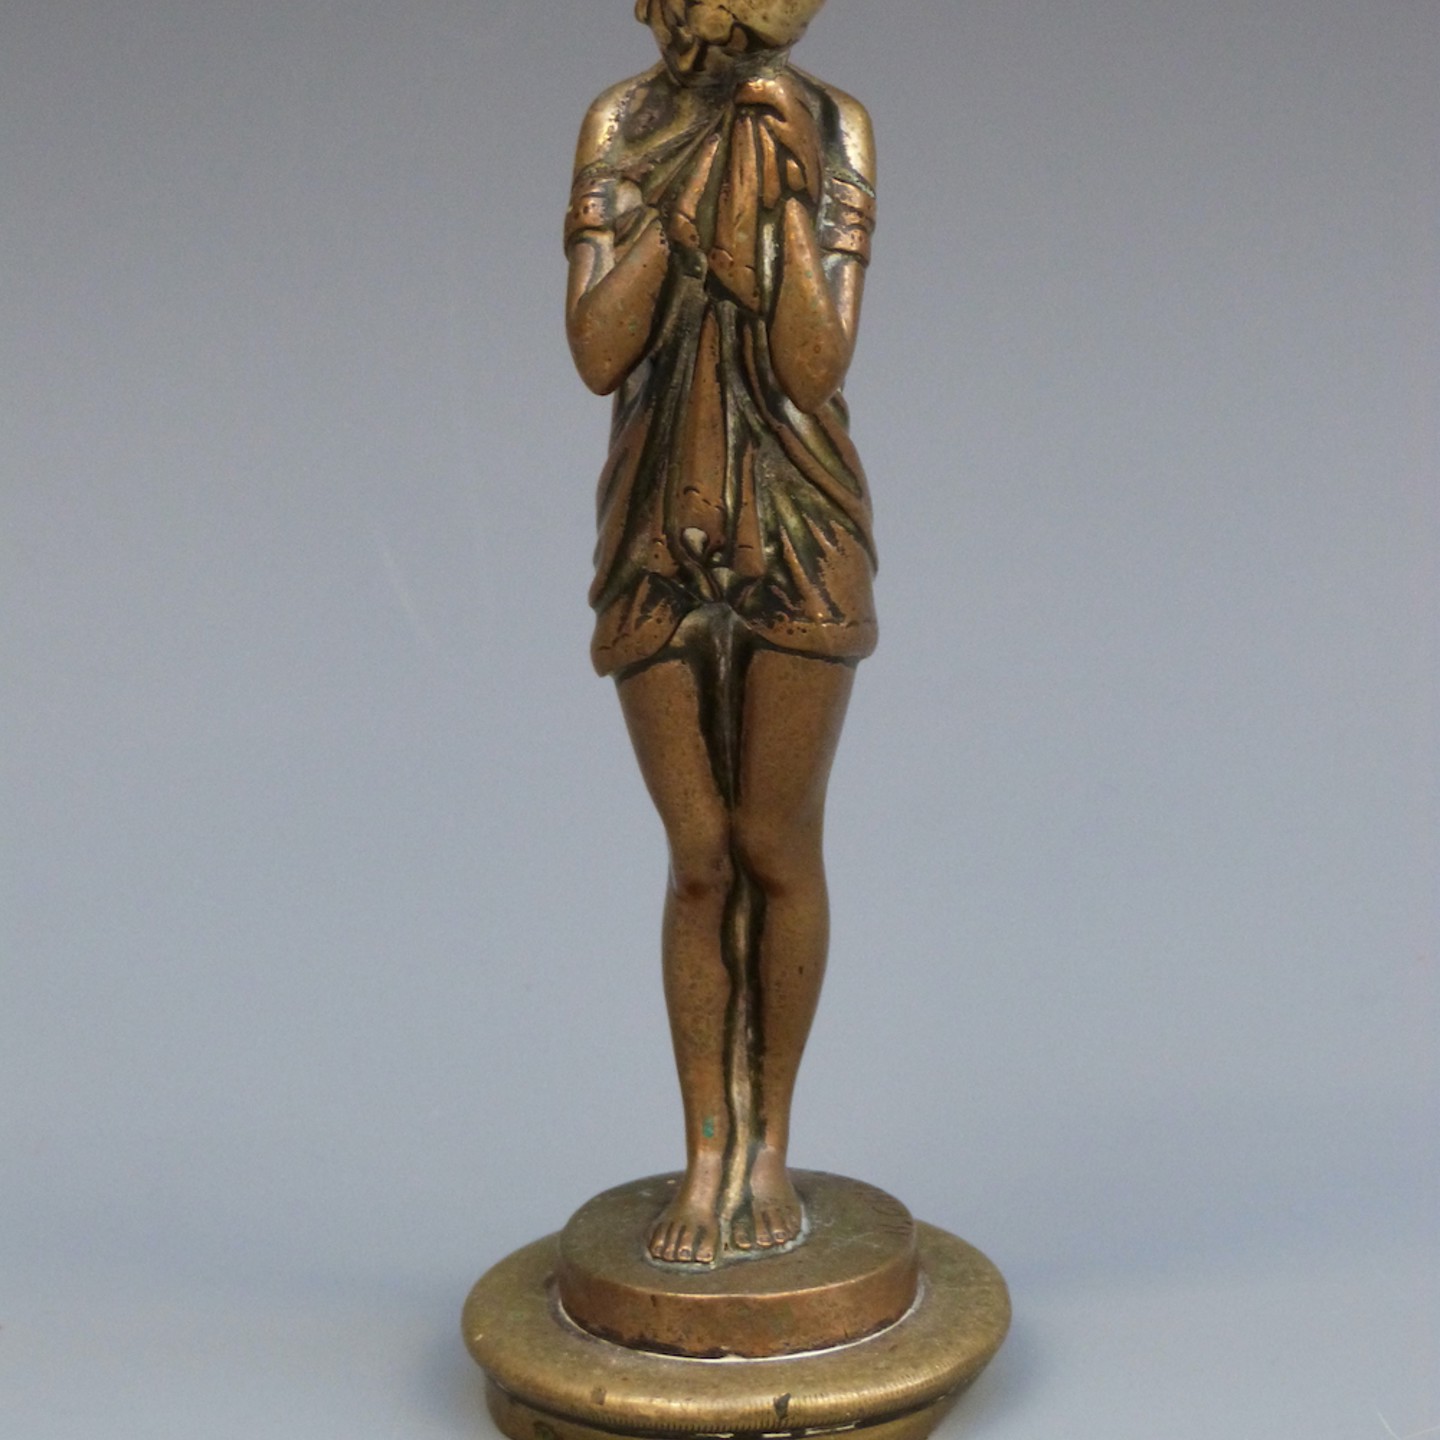 A Vintage Car Mascot Formed As An Art Deco Girl Clad In A Robe, Signed To Base H Chiparus And Also Marked Etling Paris, Height 15.5Cm. Sold For £360